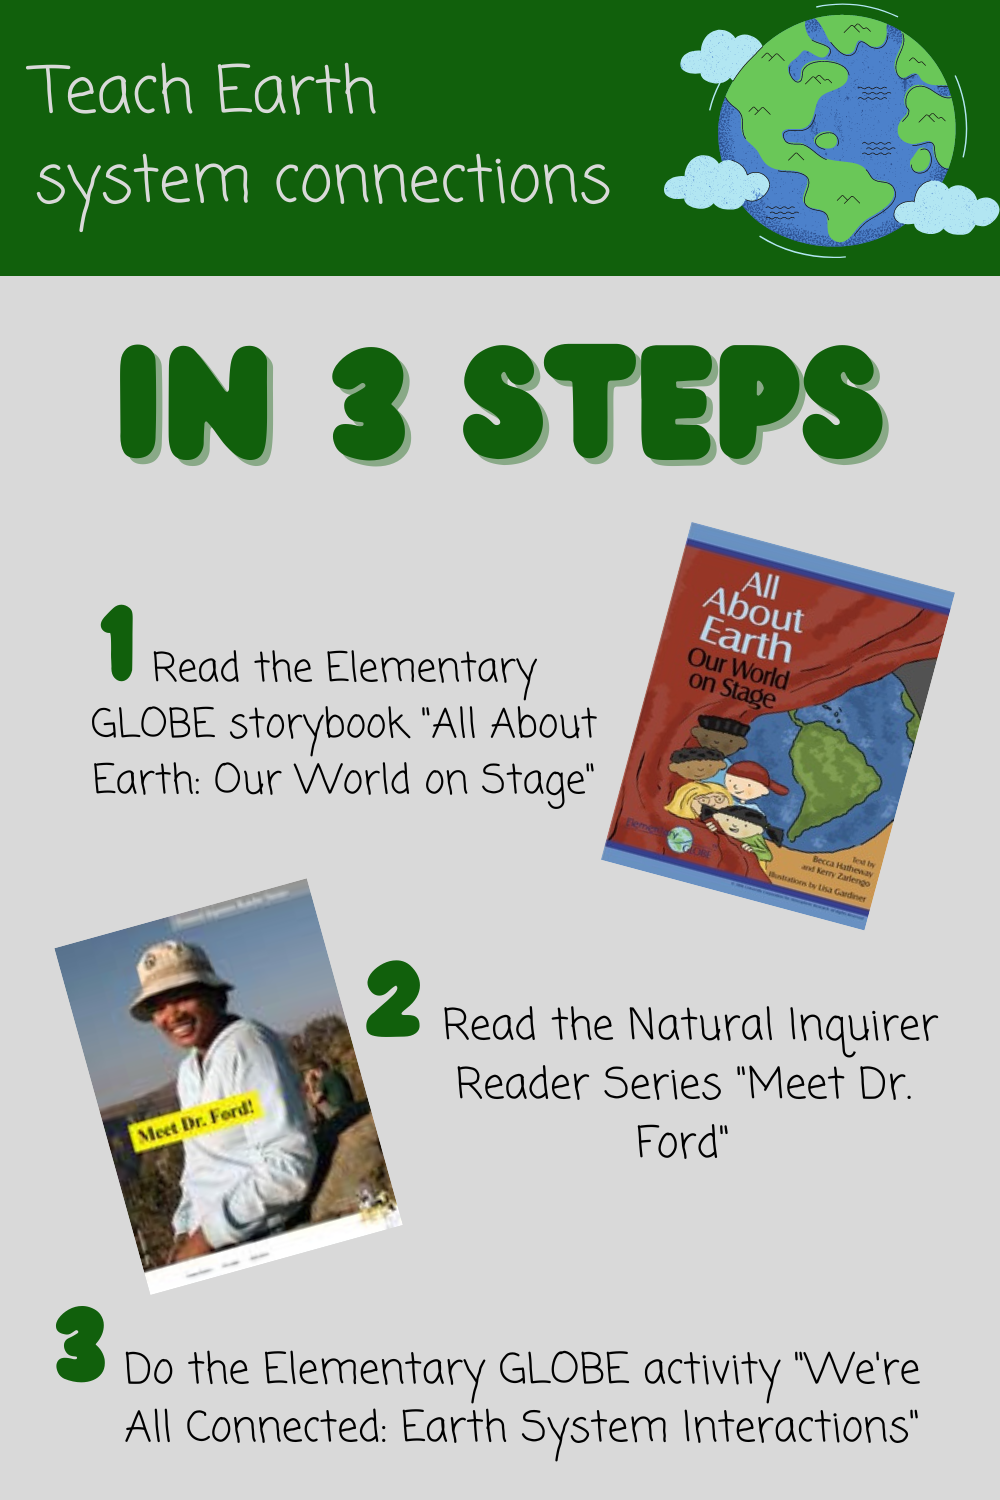 Graphic with a summary of the 3 steps listed in this blog.